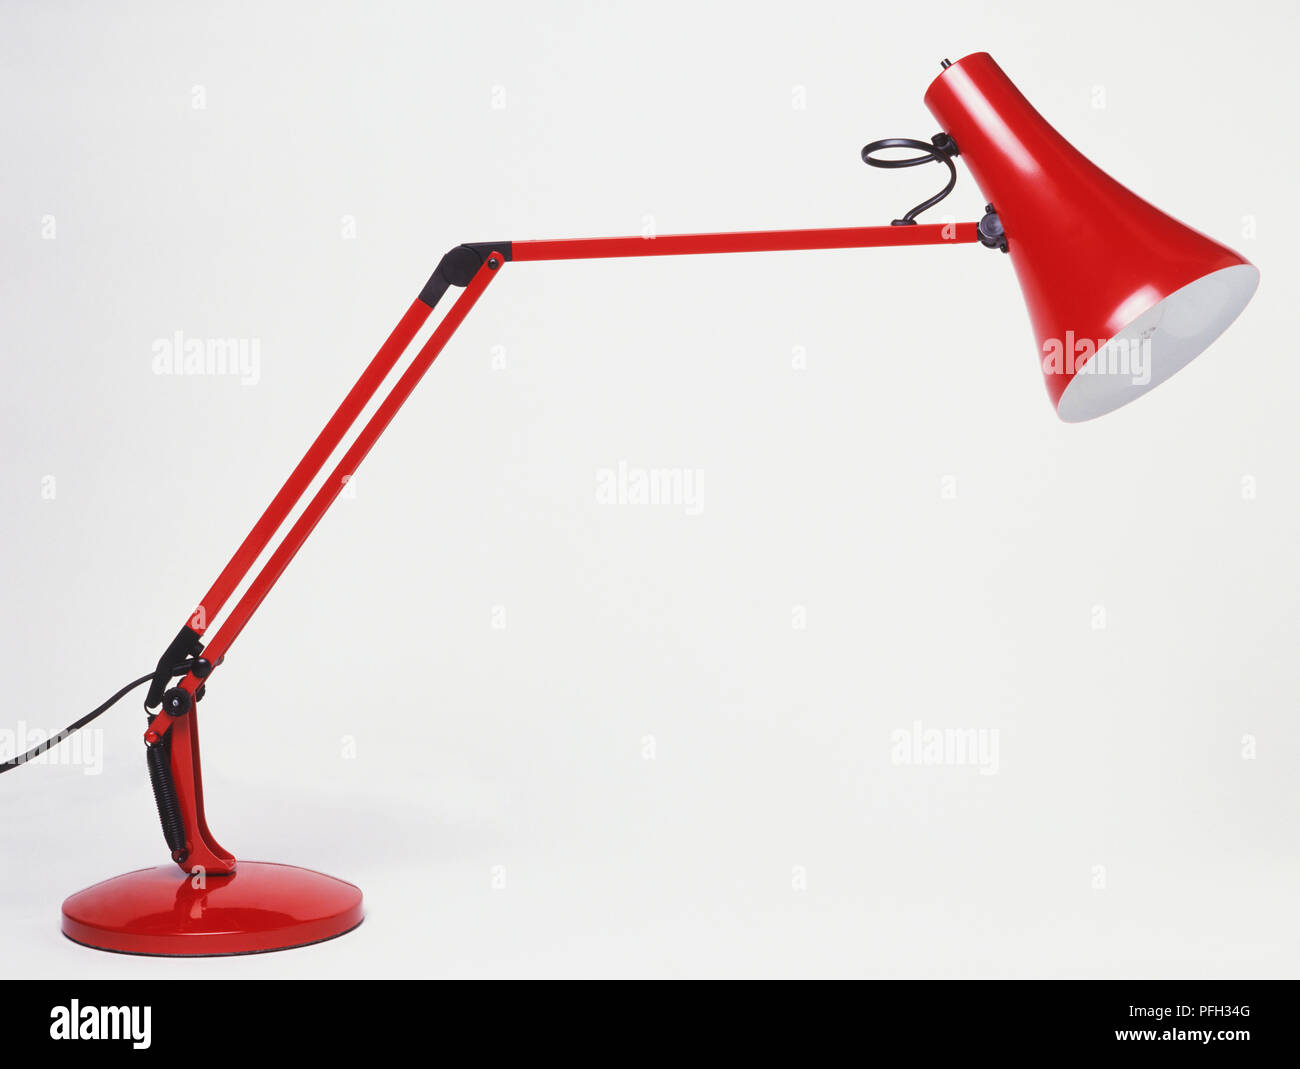 Red metal desk lamp, side view Stock Photo